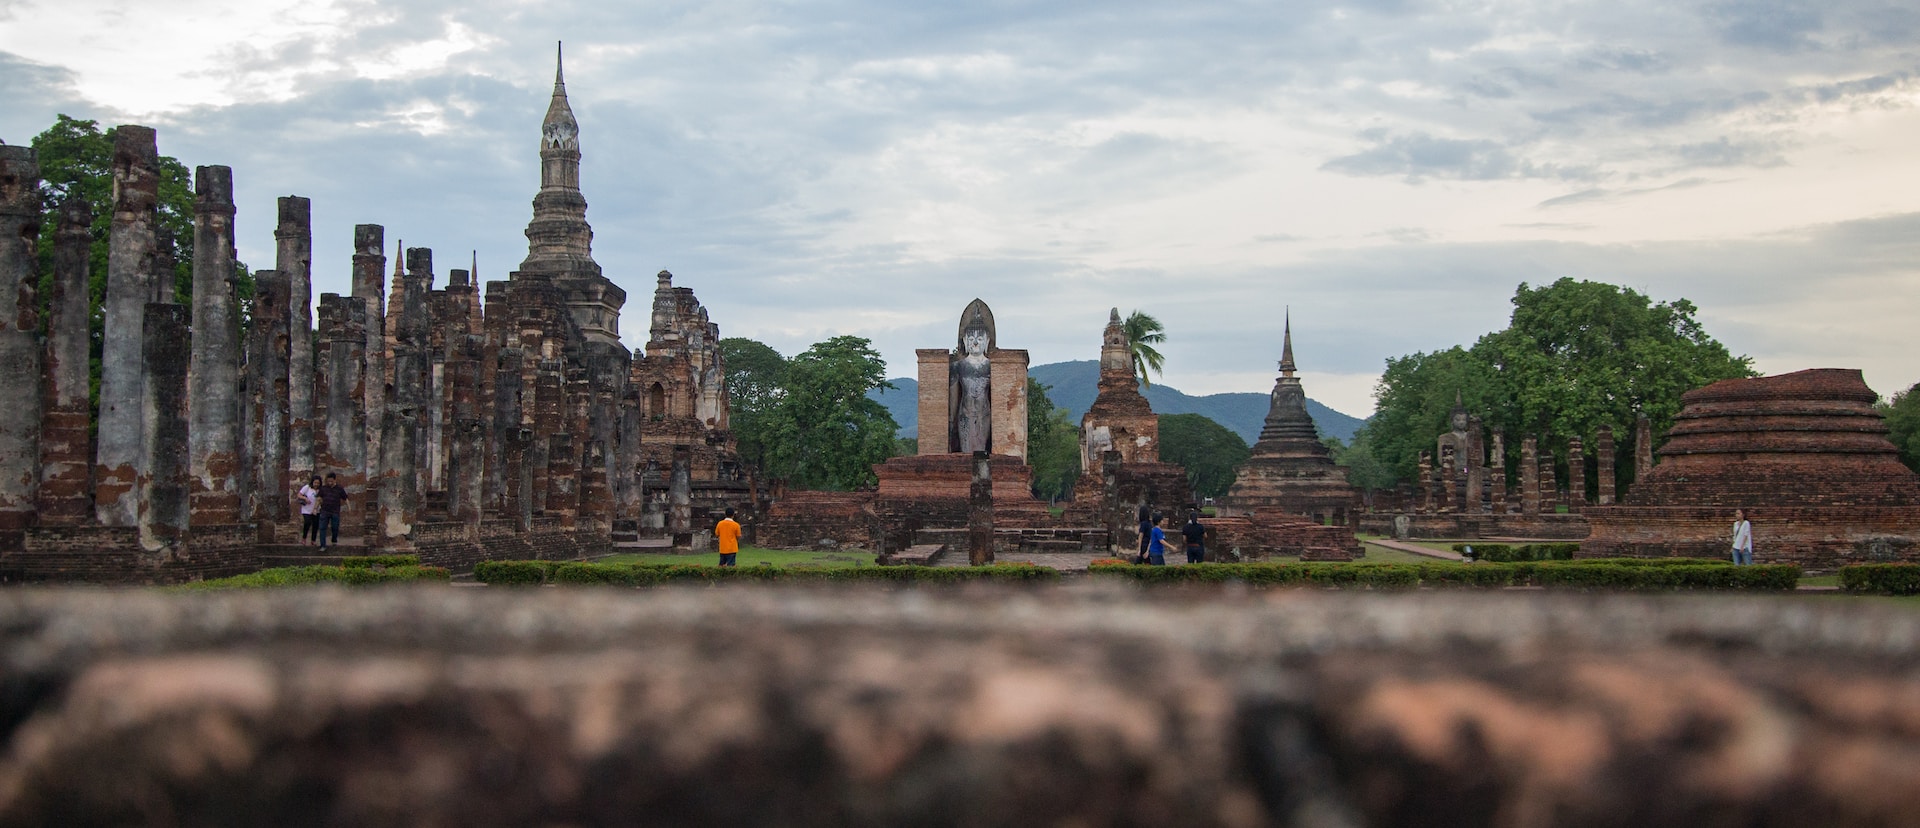 Thailand, Sukhothai historic park, temple, HD grey wallpapers, buddha images, human, people images & pictures, building, architecture, tower, steeple, spire, monument, shrine, worship, ruins, hydrant, castle, public domain images